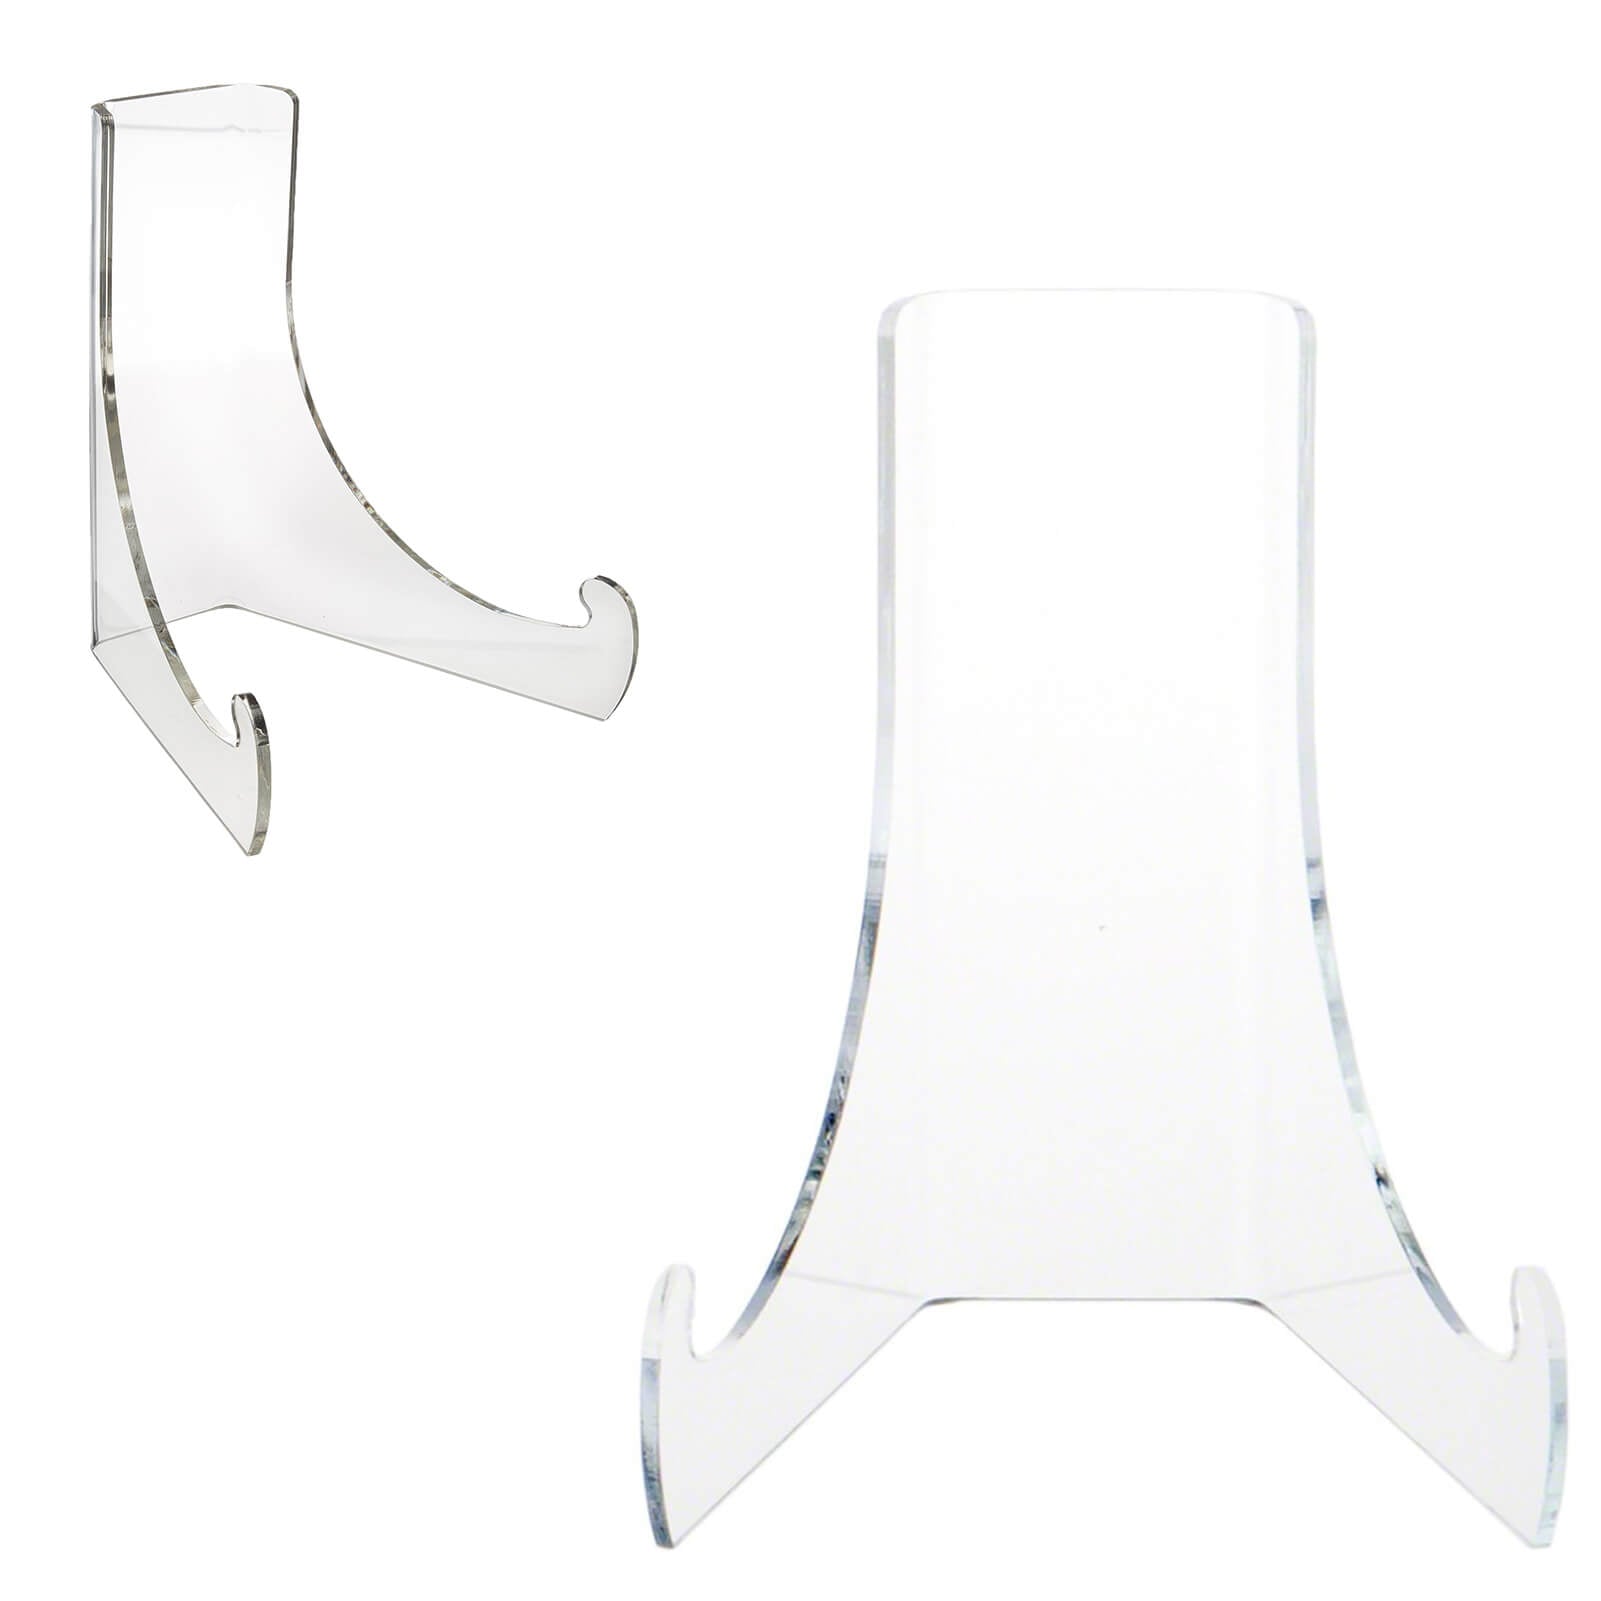 Boloyo 60-Degree Angle Acrylic Book Stand with Shallow Support Ledges